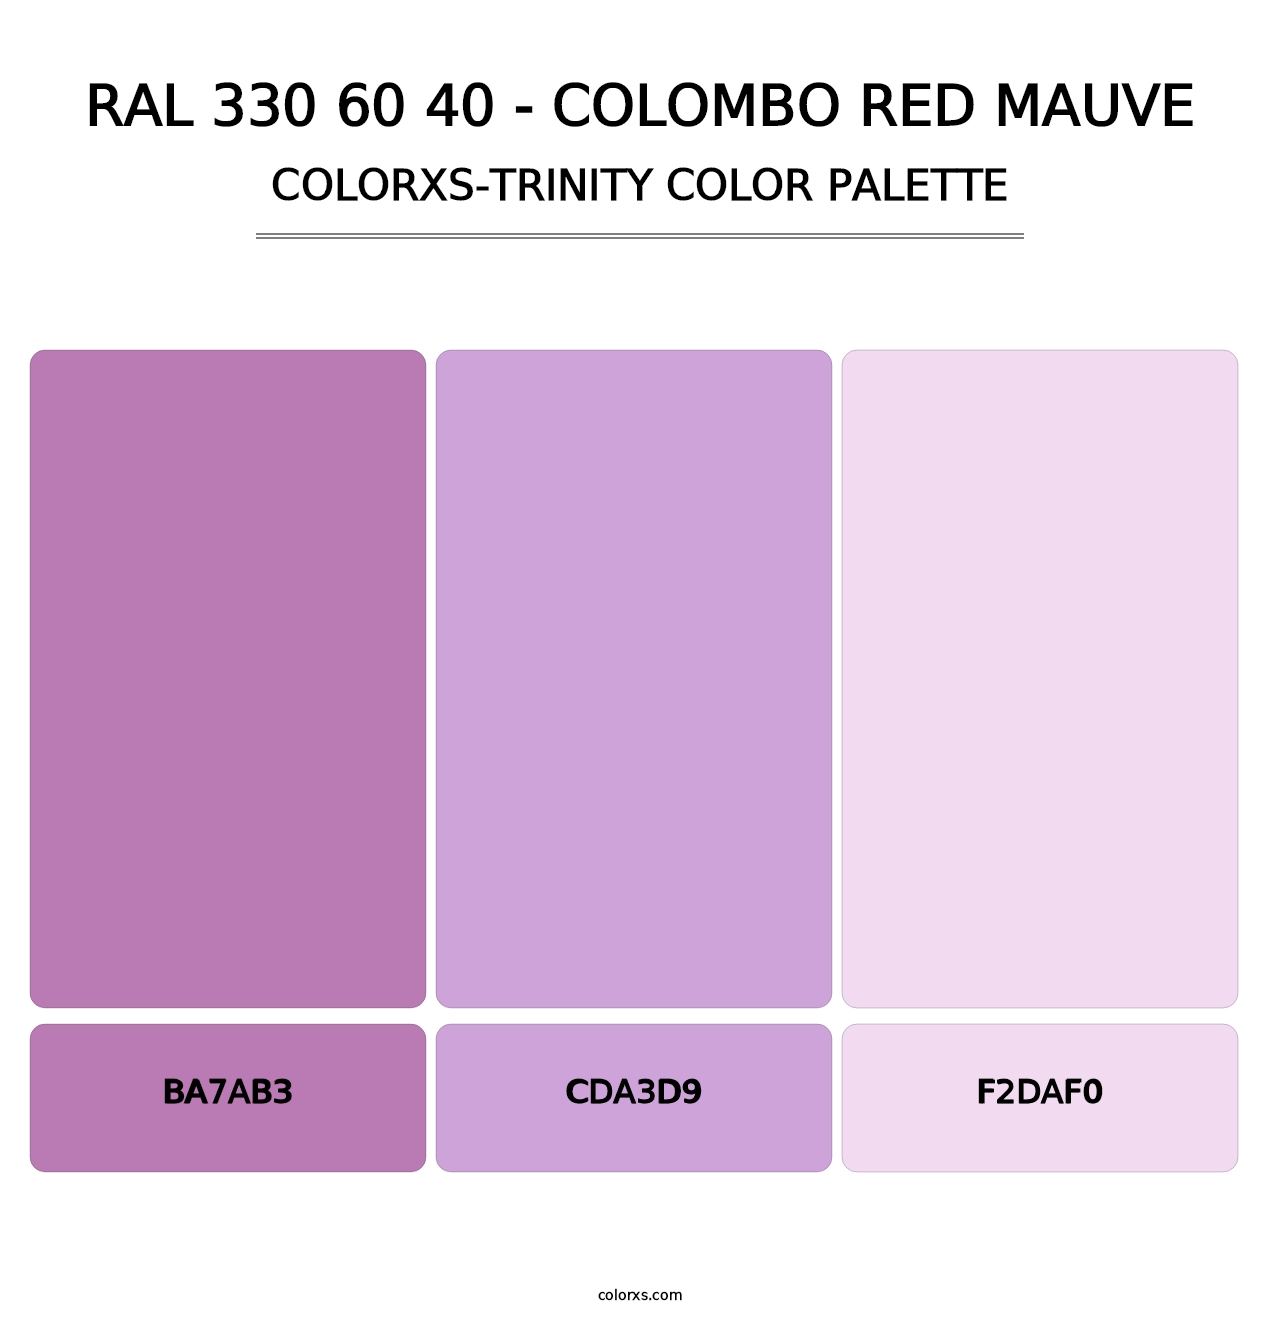 RAL 330 60 40 - Colombo Red Mauve - Colorxs Trinity Palette